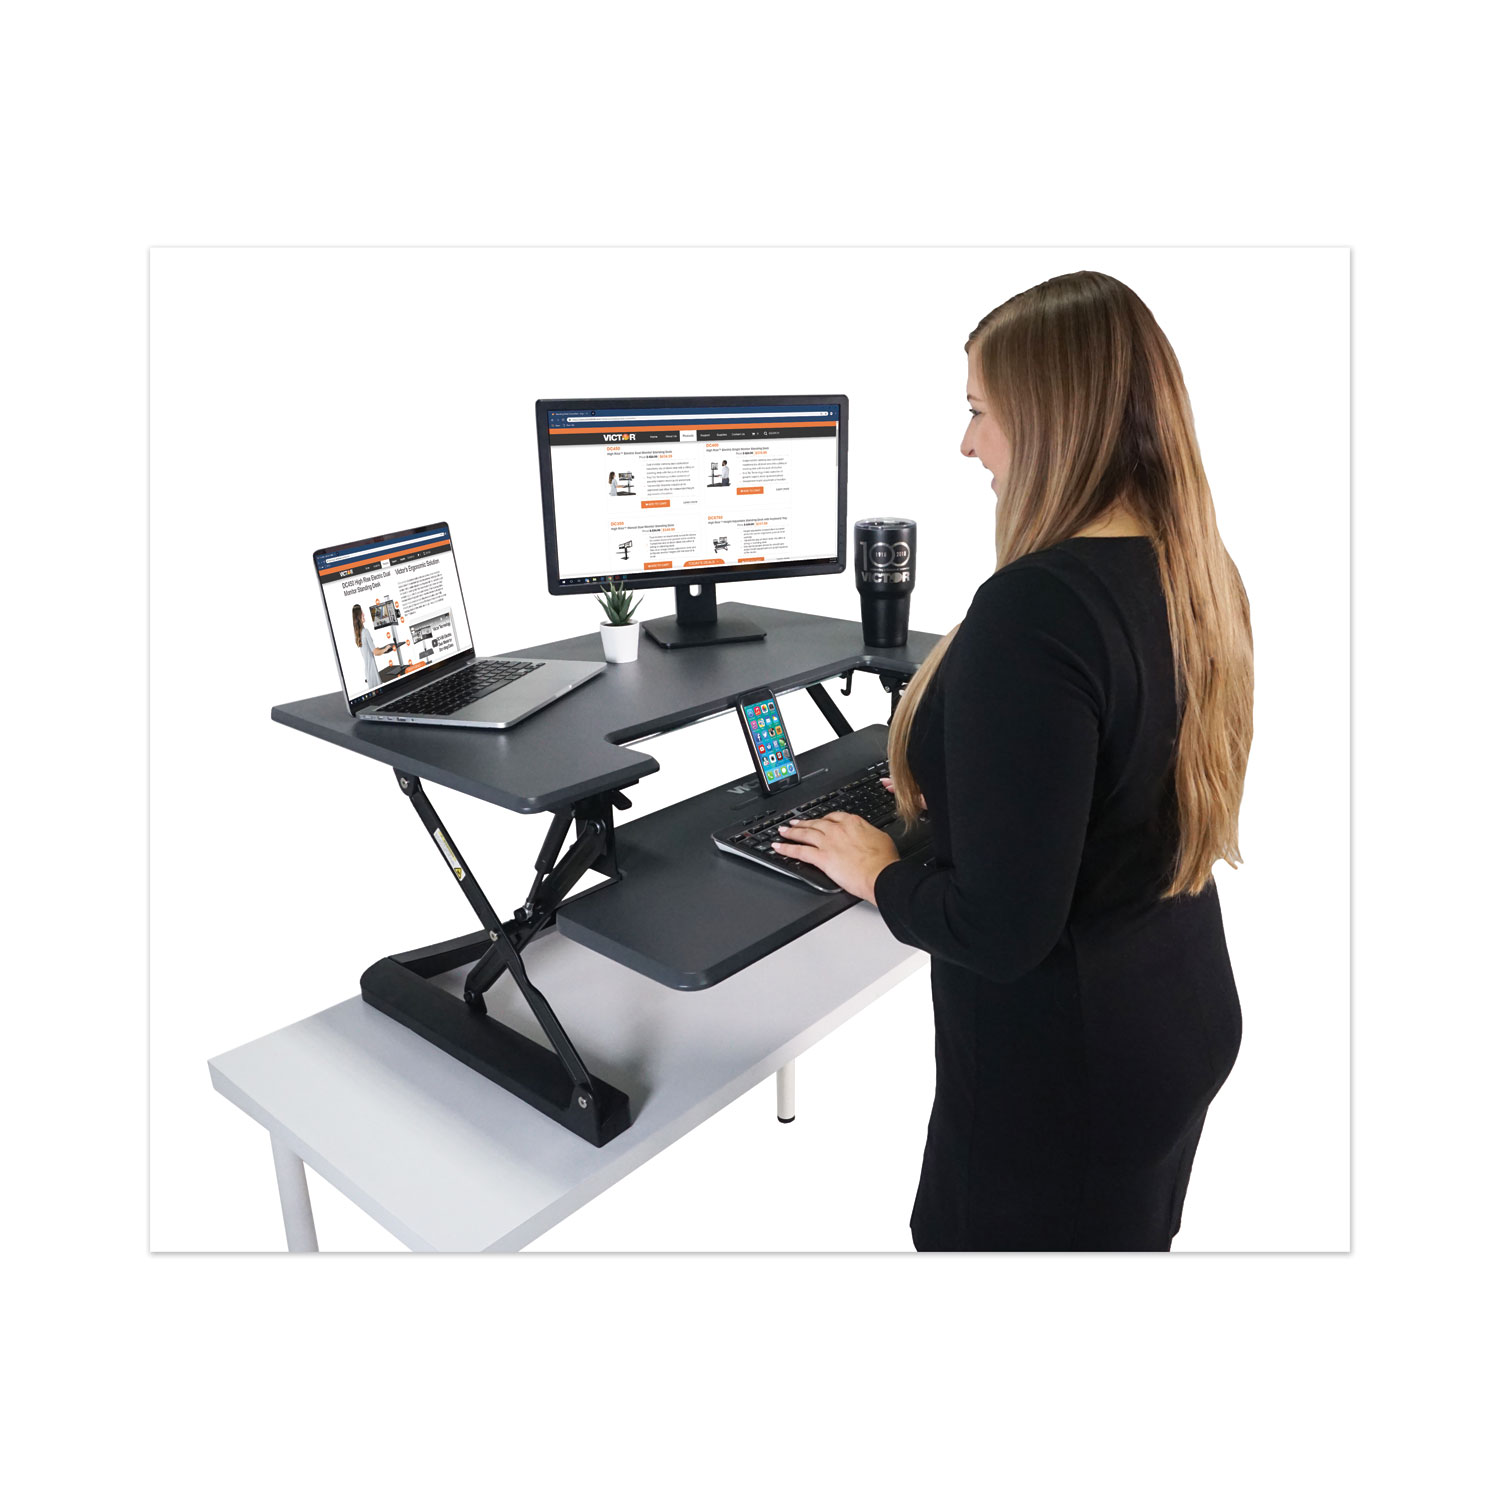  Victor VCTDCX760G High Rise Height Adjustable Standing Desk with Keyboard Tray, 36w x 31.25d x 20h, Gray/Black (VCTDCX760G) 